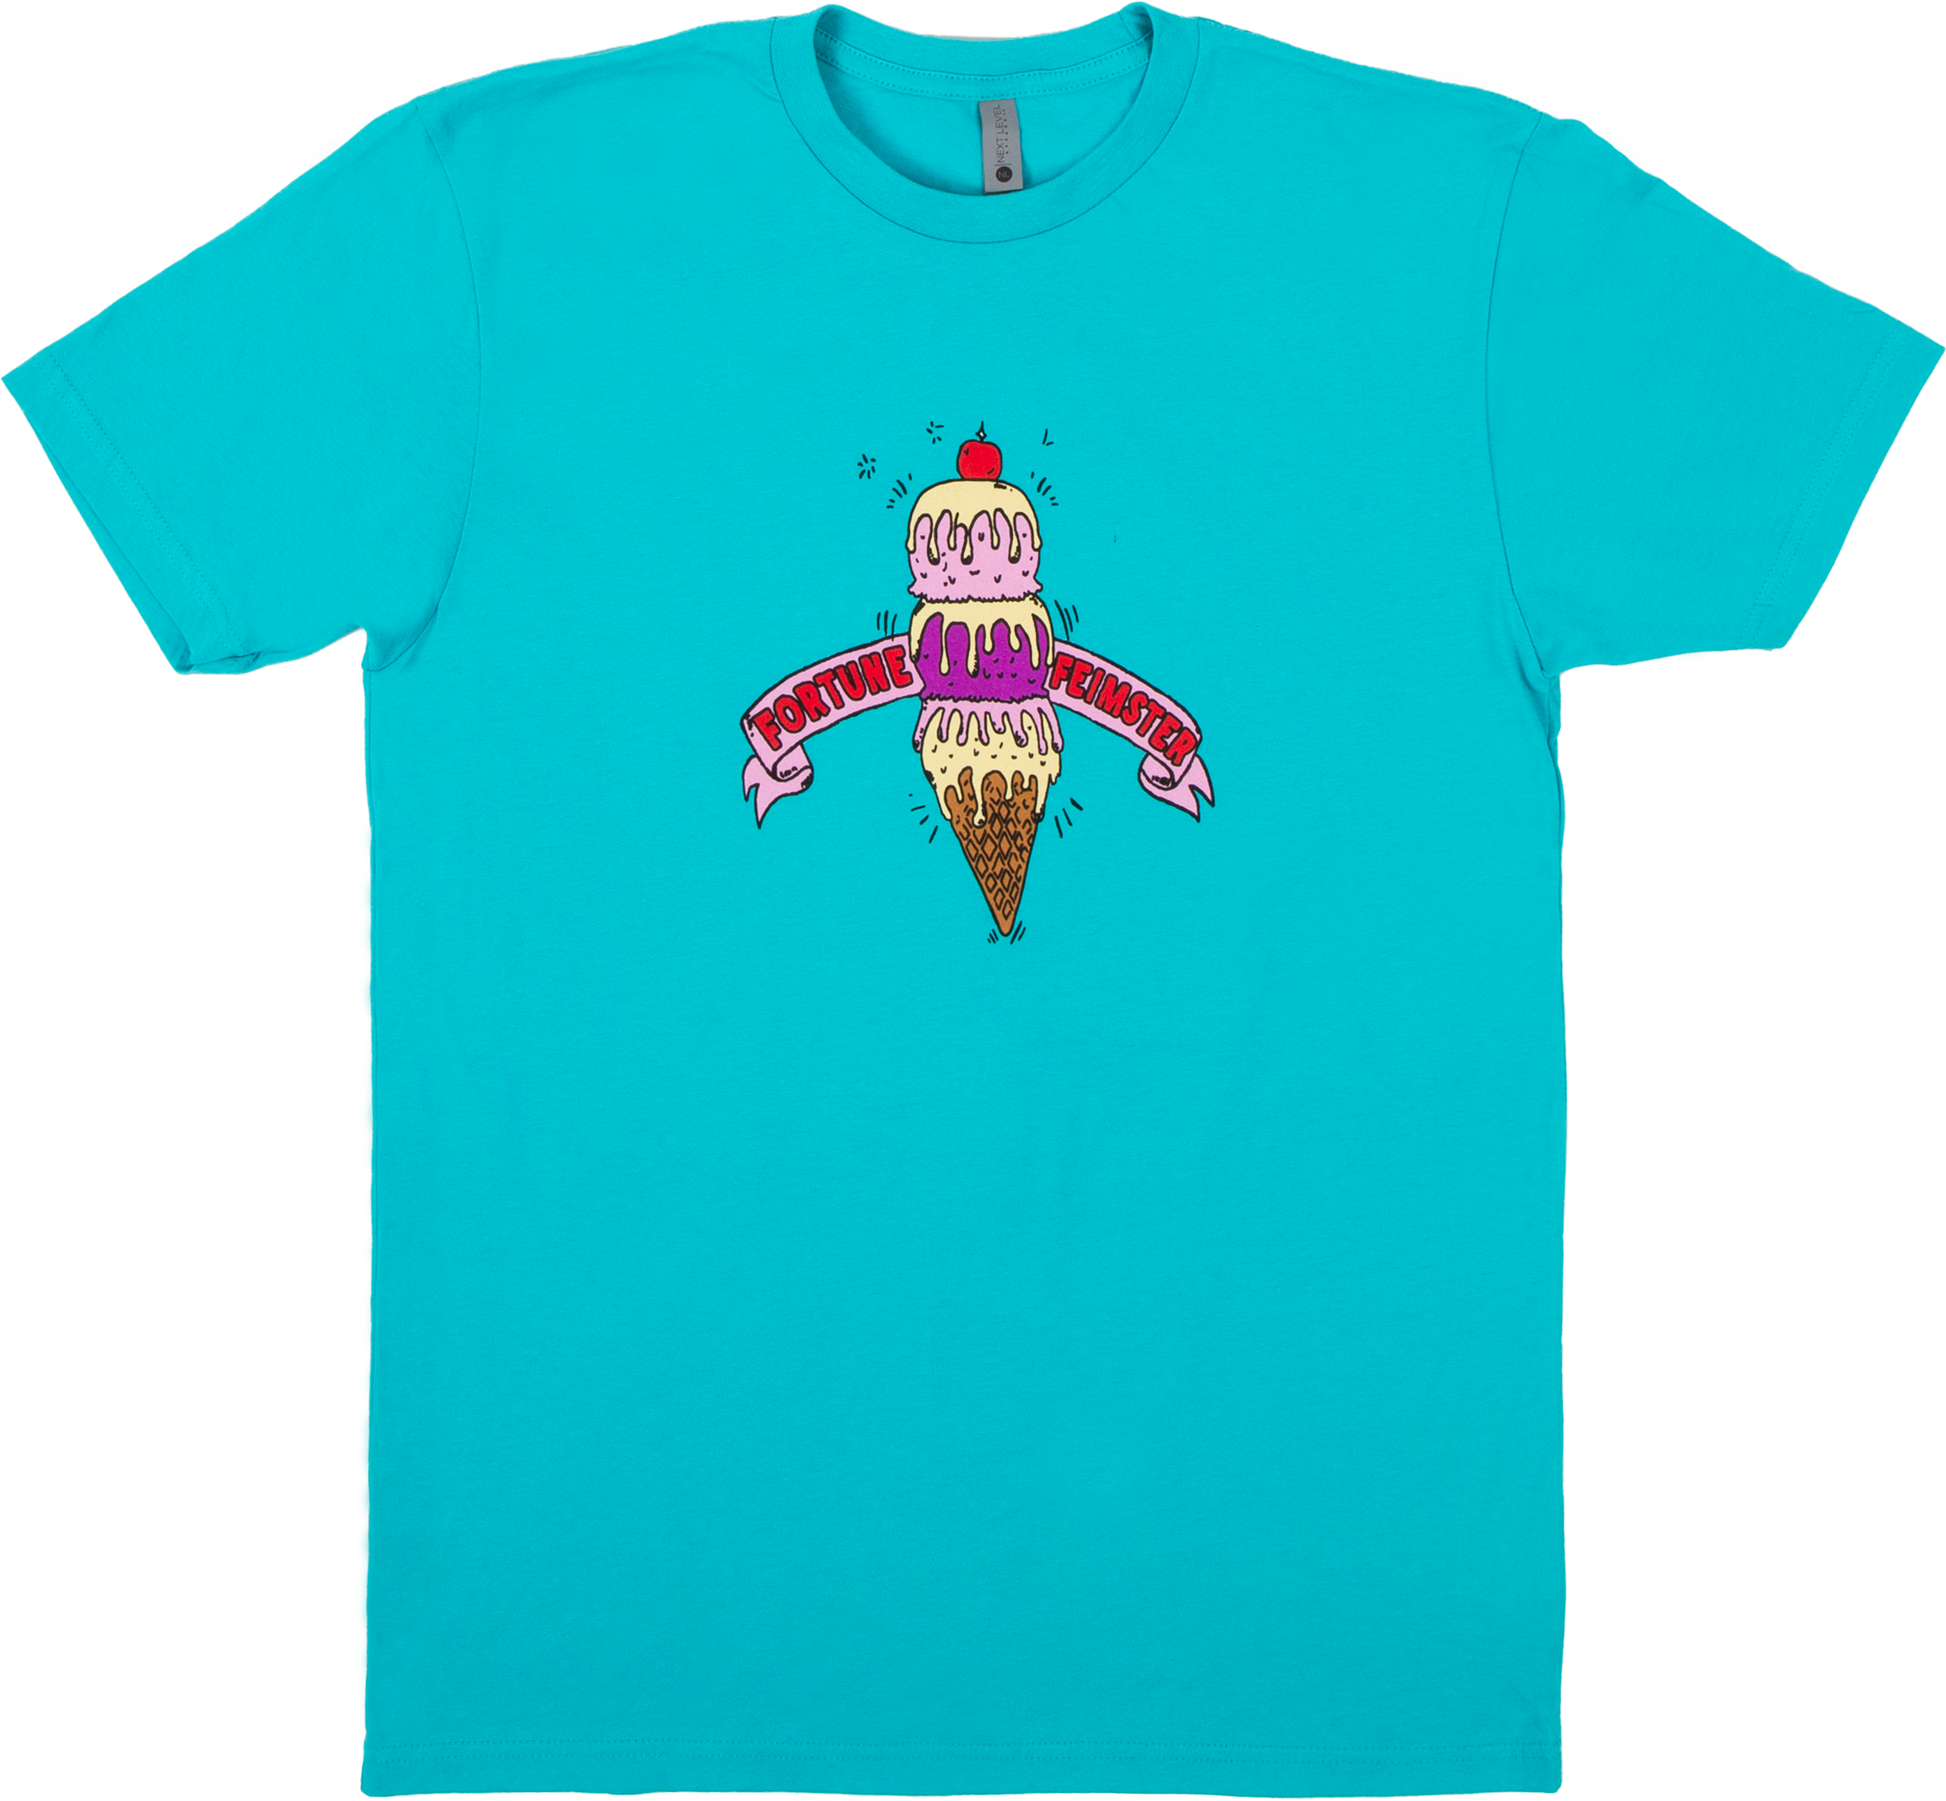 Turquoise T-shirt featuring an ice cream design